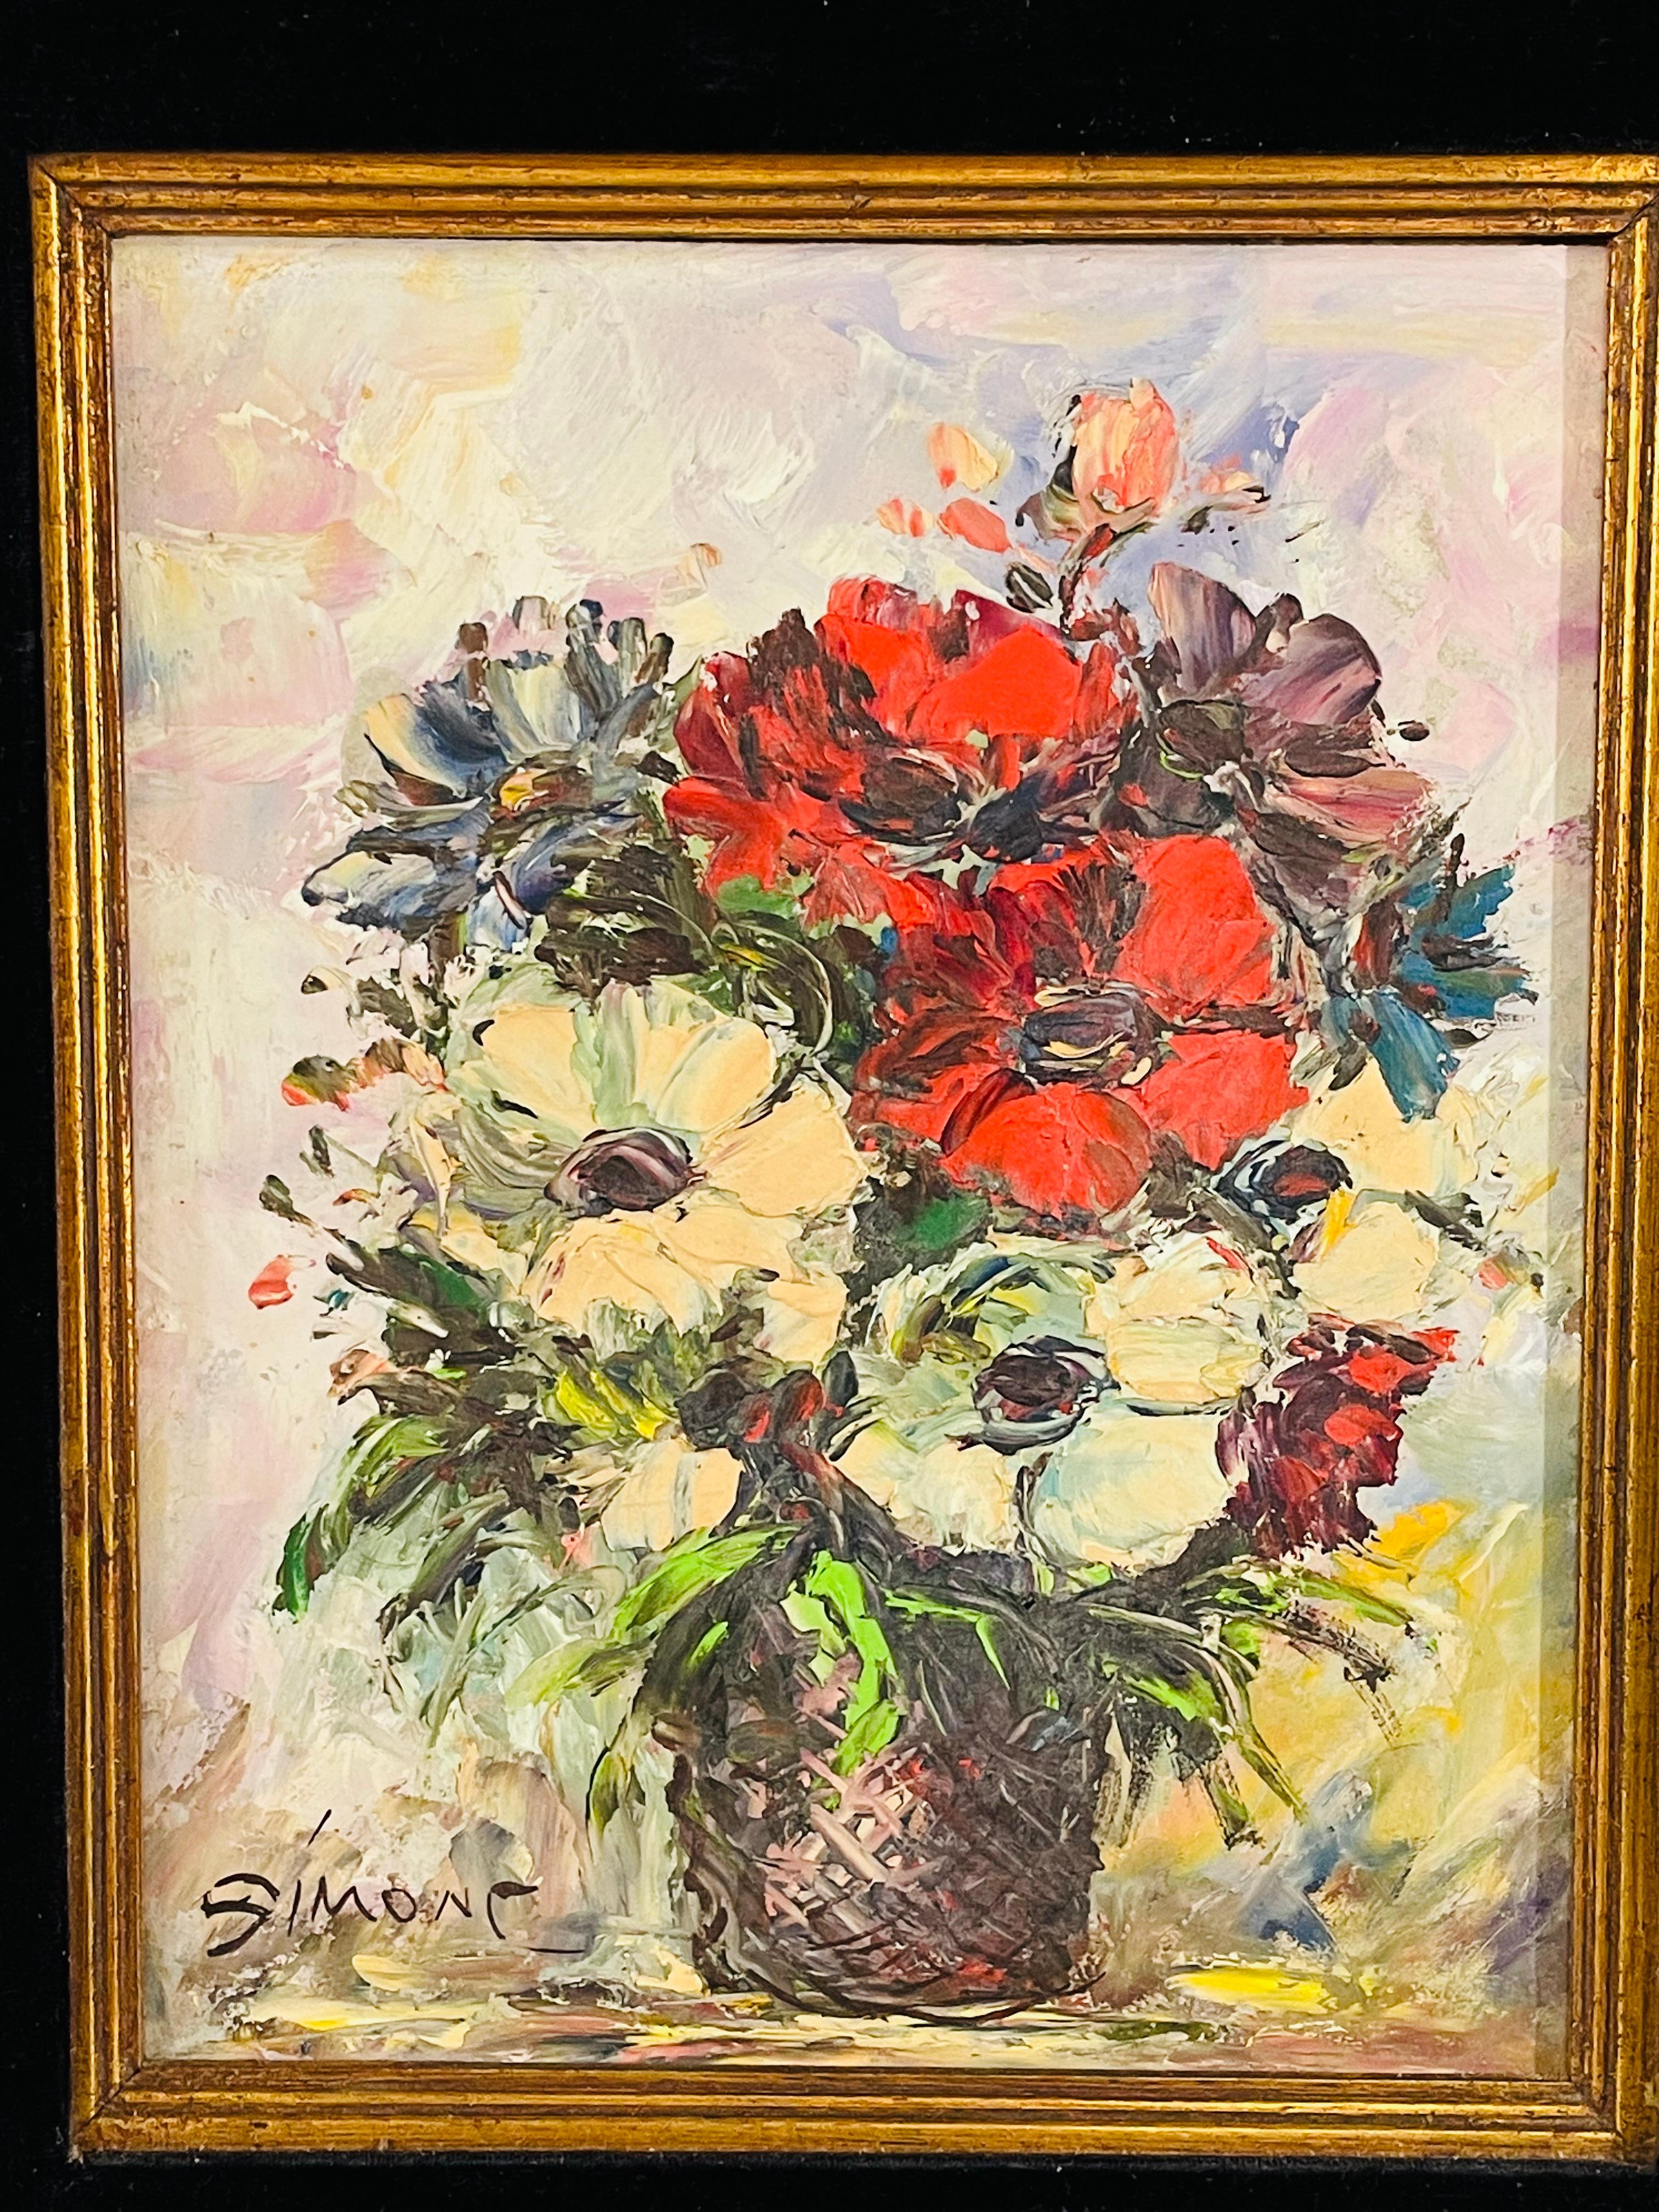 A vintage Mid Century 1950's still life oil on board painting Signed by the artist Simone in the bottom left. Featuring vibrant colors, the painting is presented in a custom fame with black velvet matting and hand carved wooden gilded frame. This